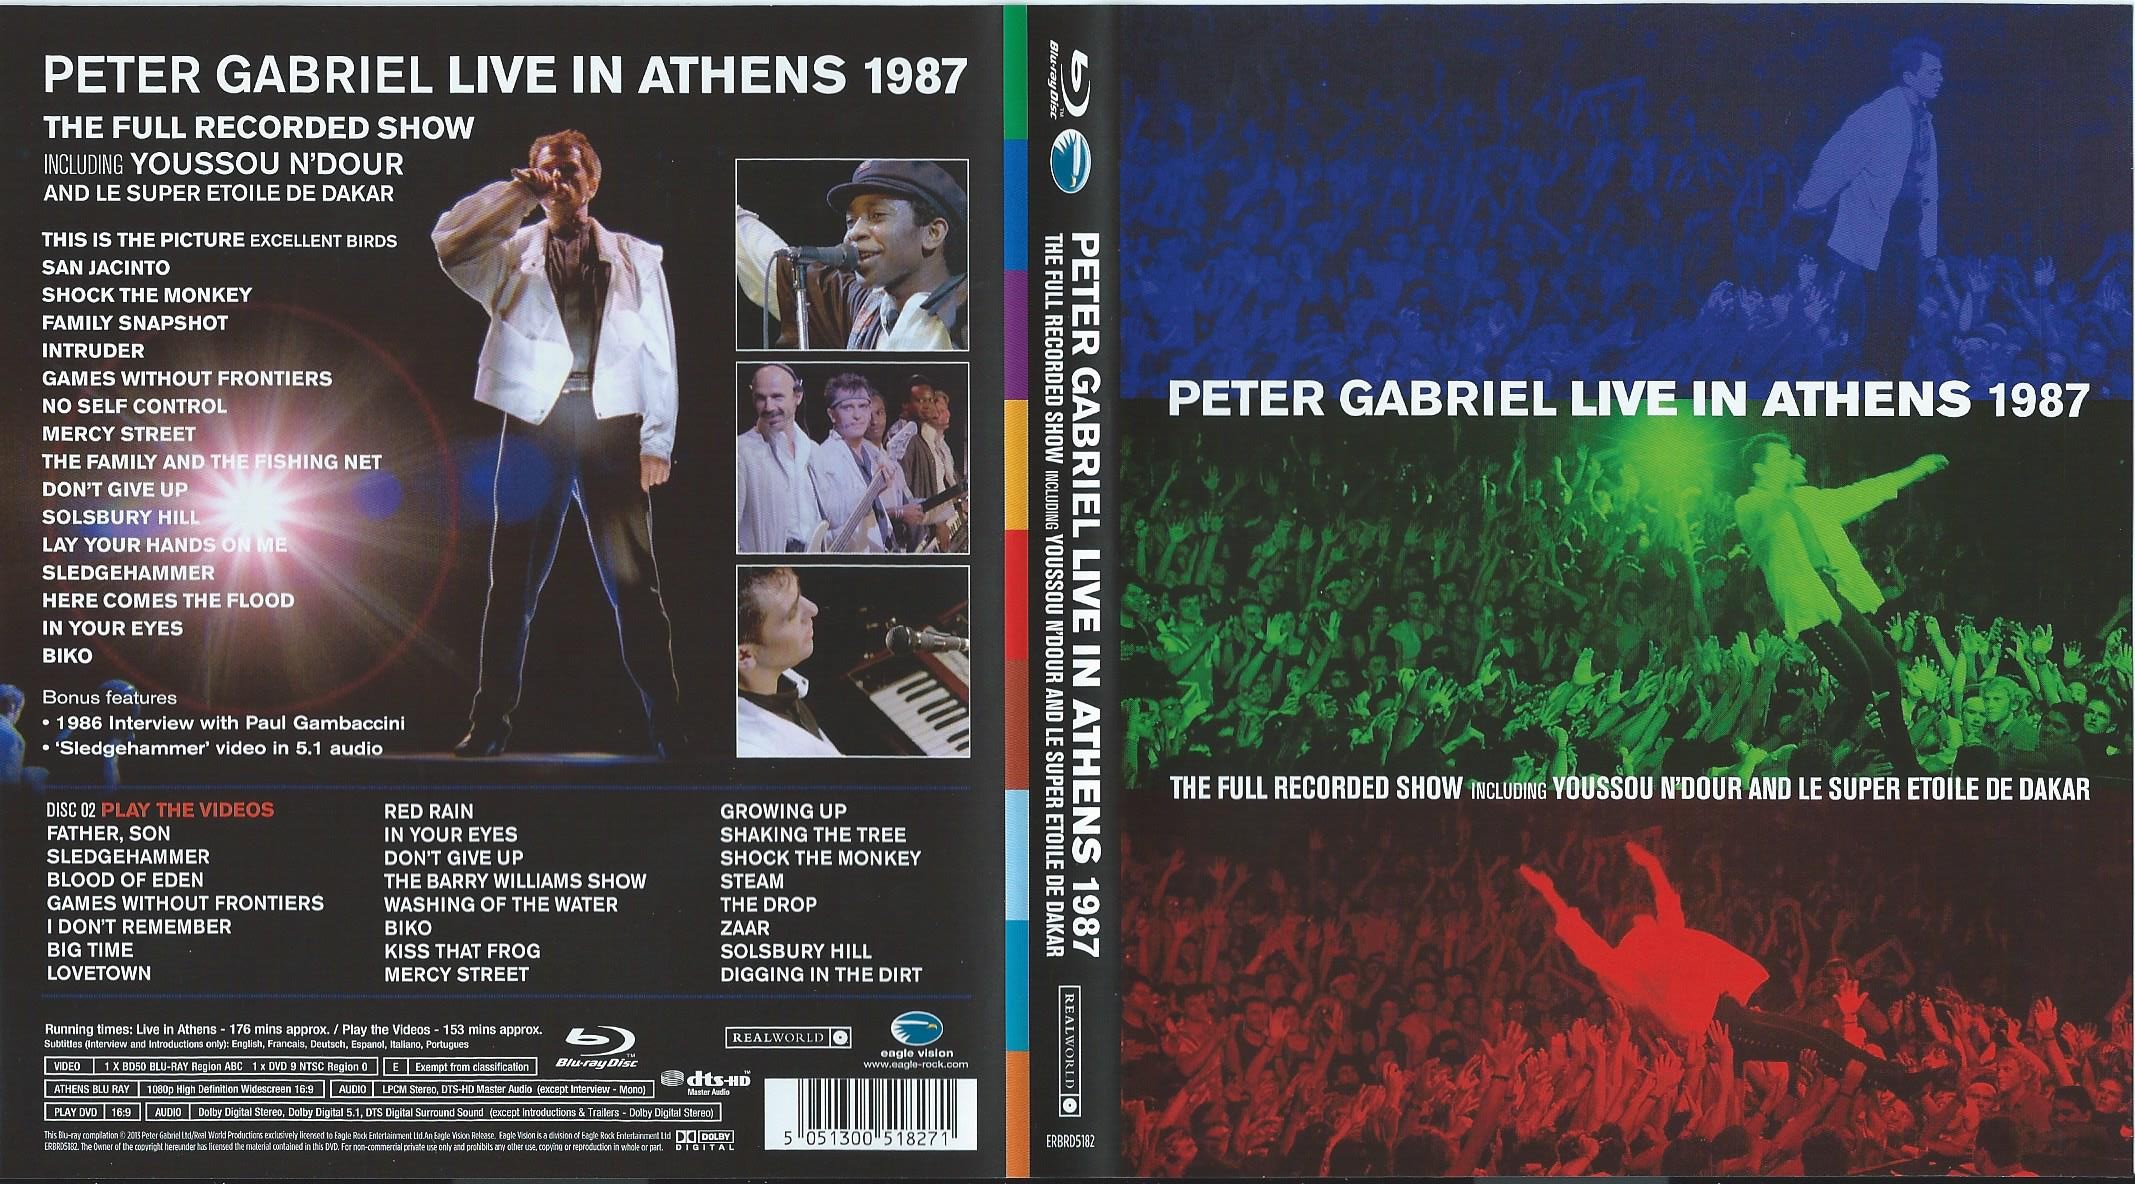 Jaquette DVD Peter Gabriel Live in Athens 1987 (BLU-RAY)